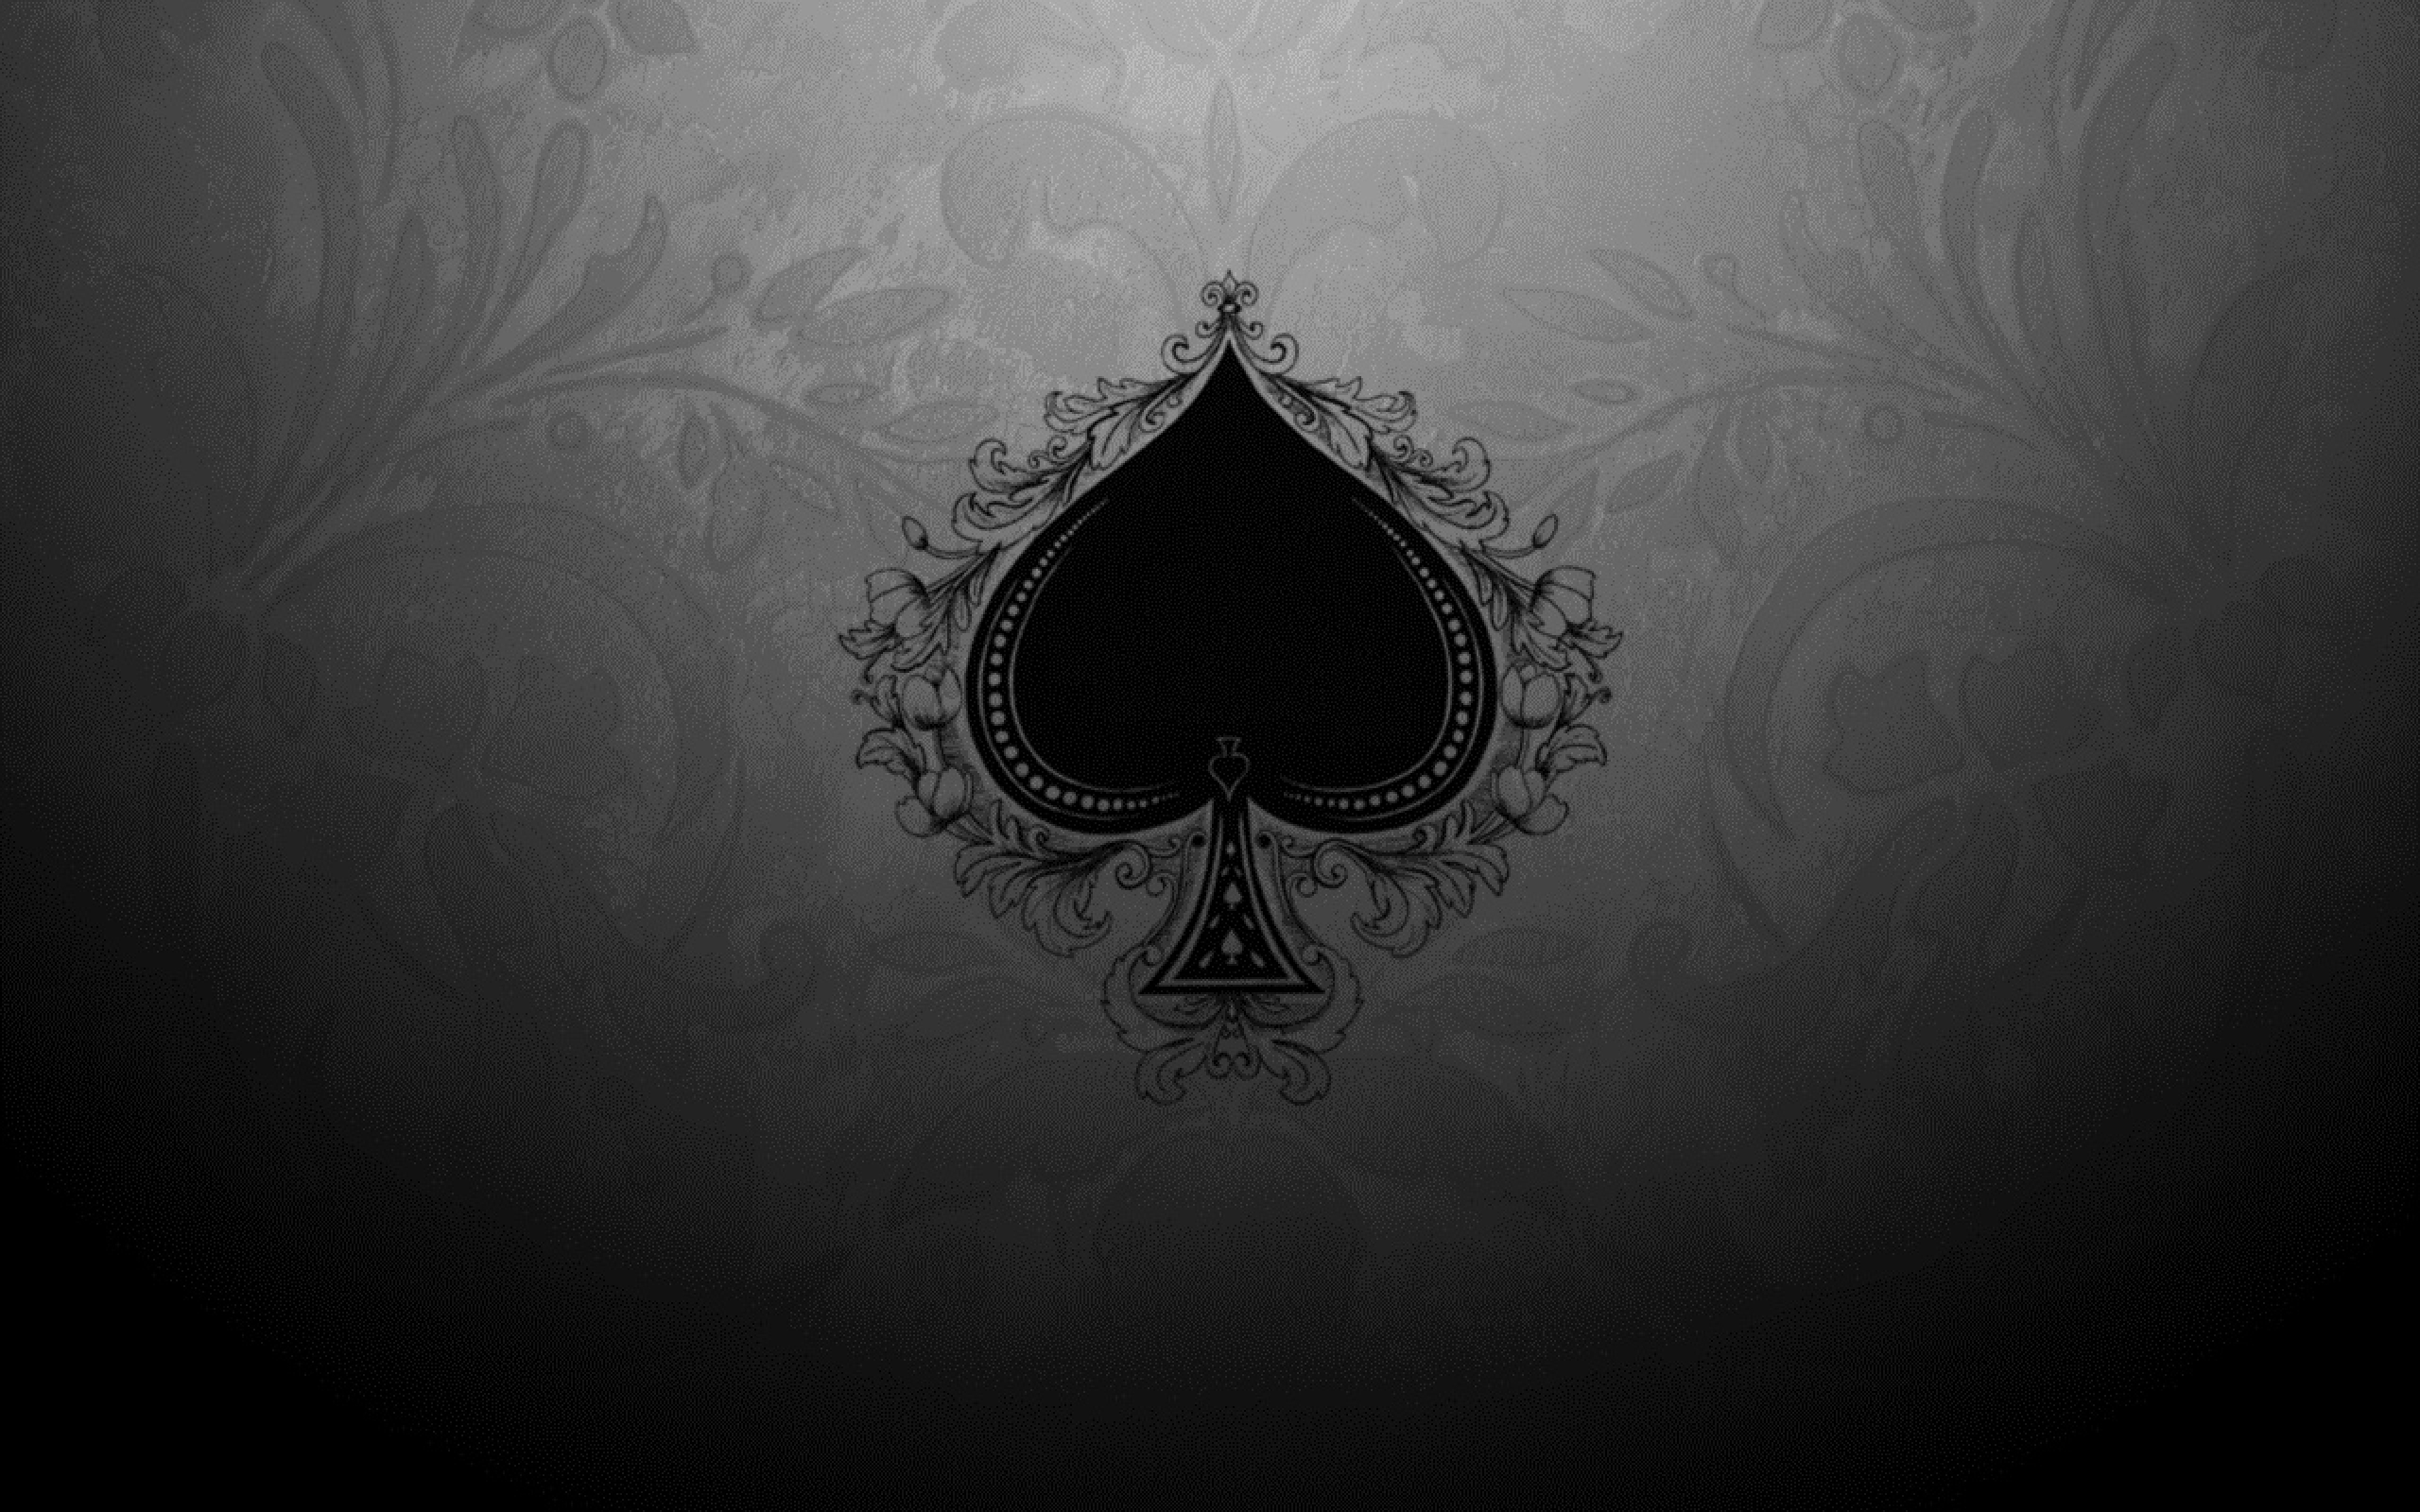 10 New Ace Of Spades Wallpapers FULL HD 1920×1080 For PC Desktop